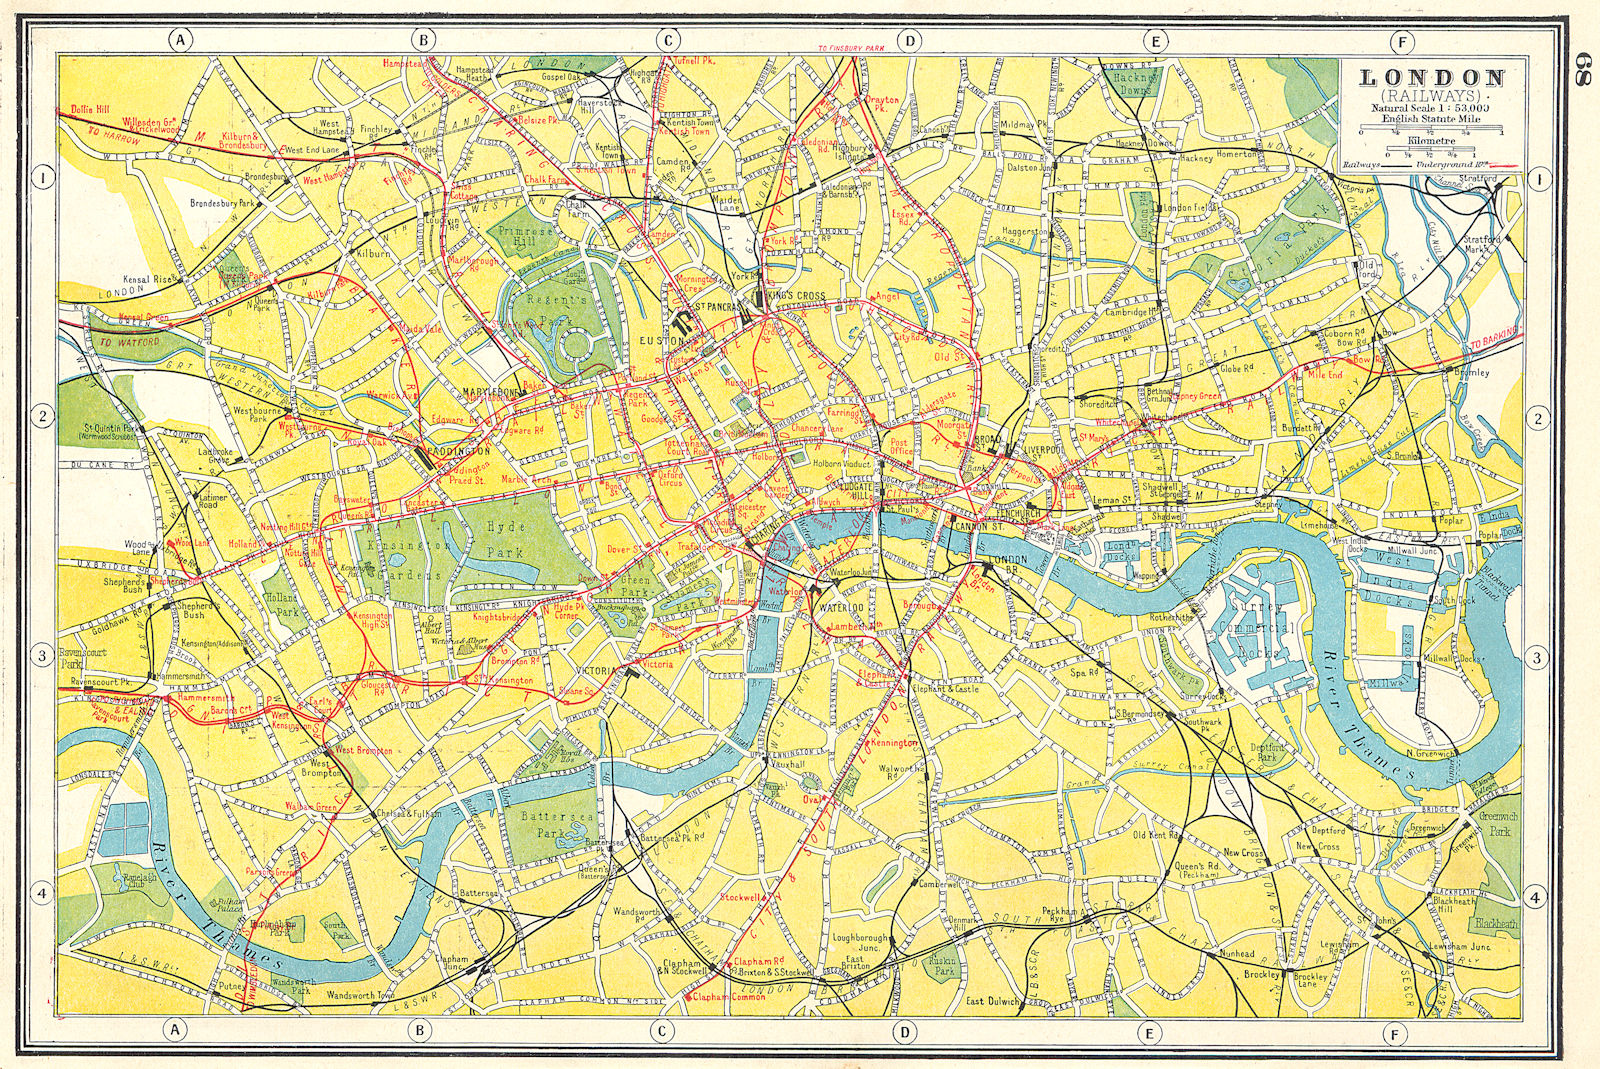 LONDON. Showing railways and underground tube lines. HARMSWORTH 1920 old map